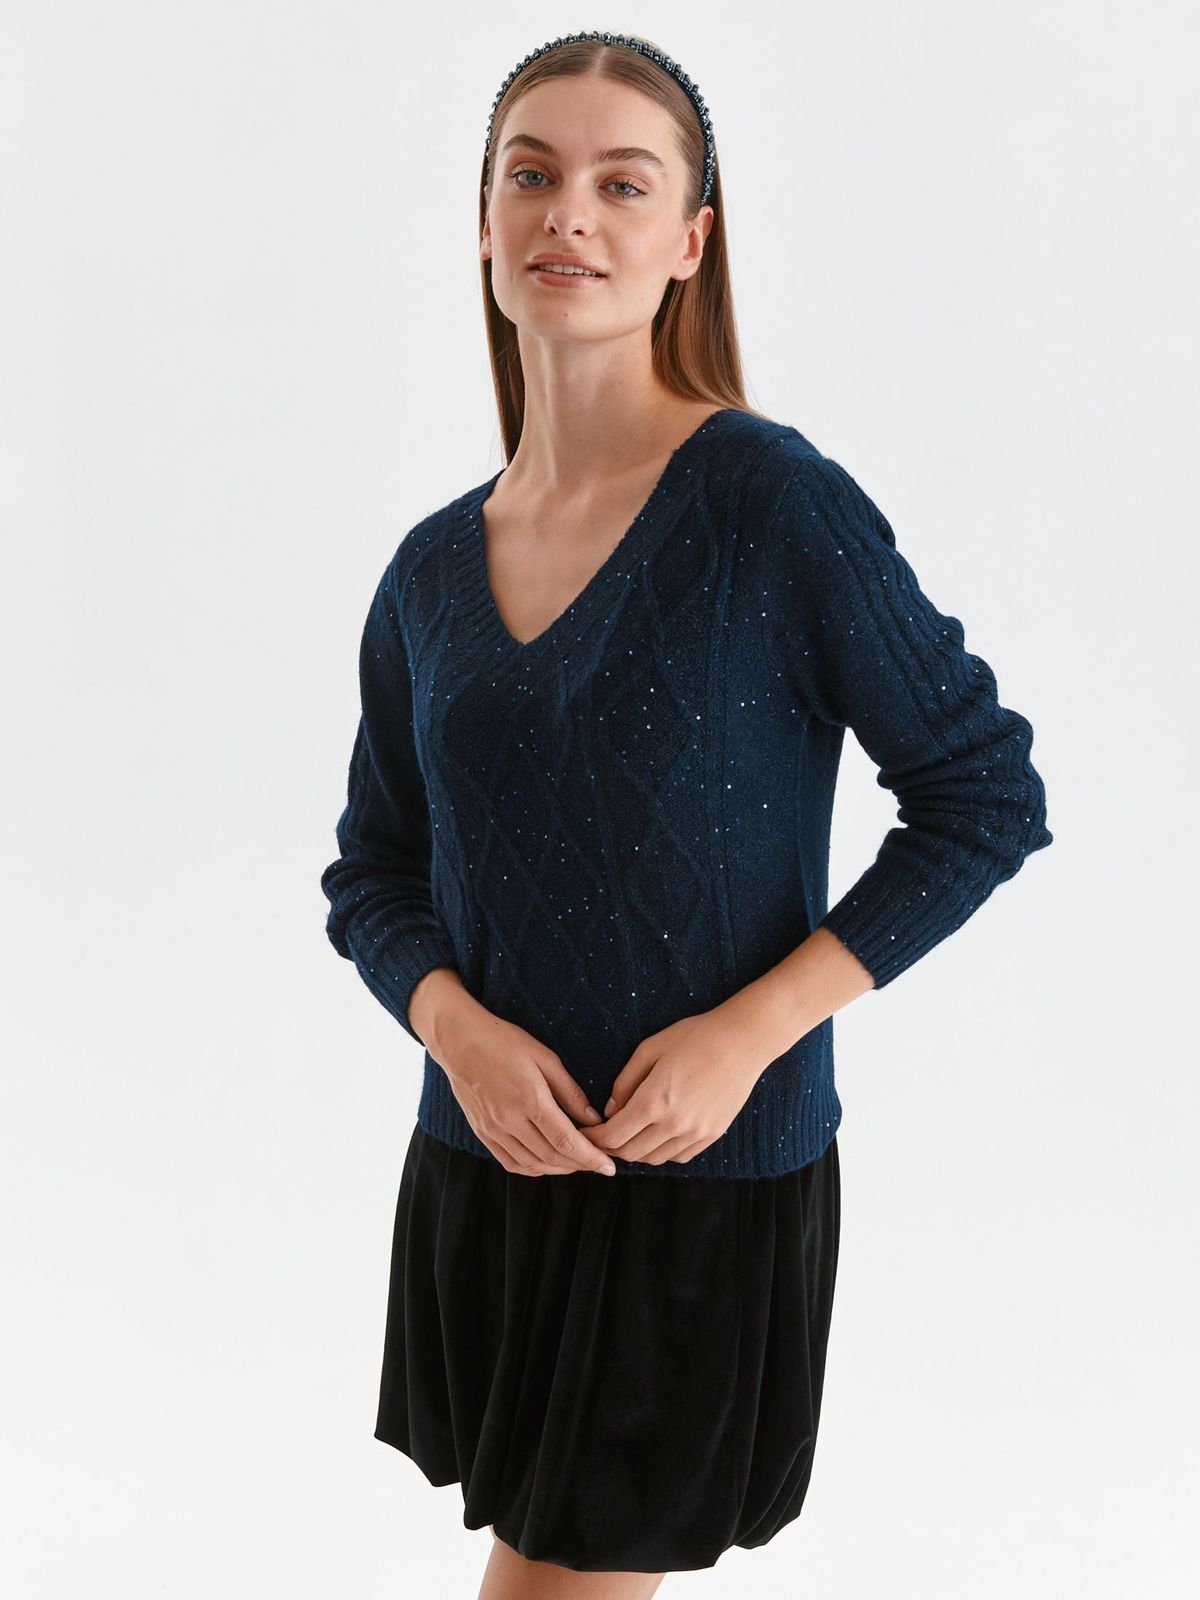 Petrol blue sweater knitted loose fit with sequin embellished details raised pattern